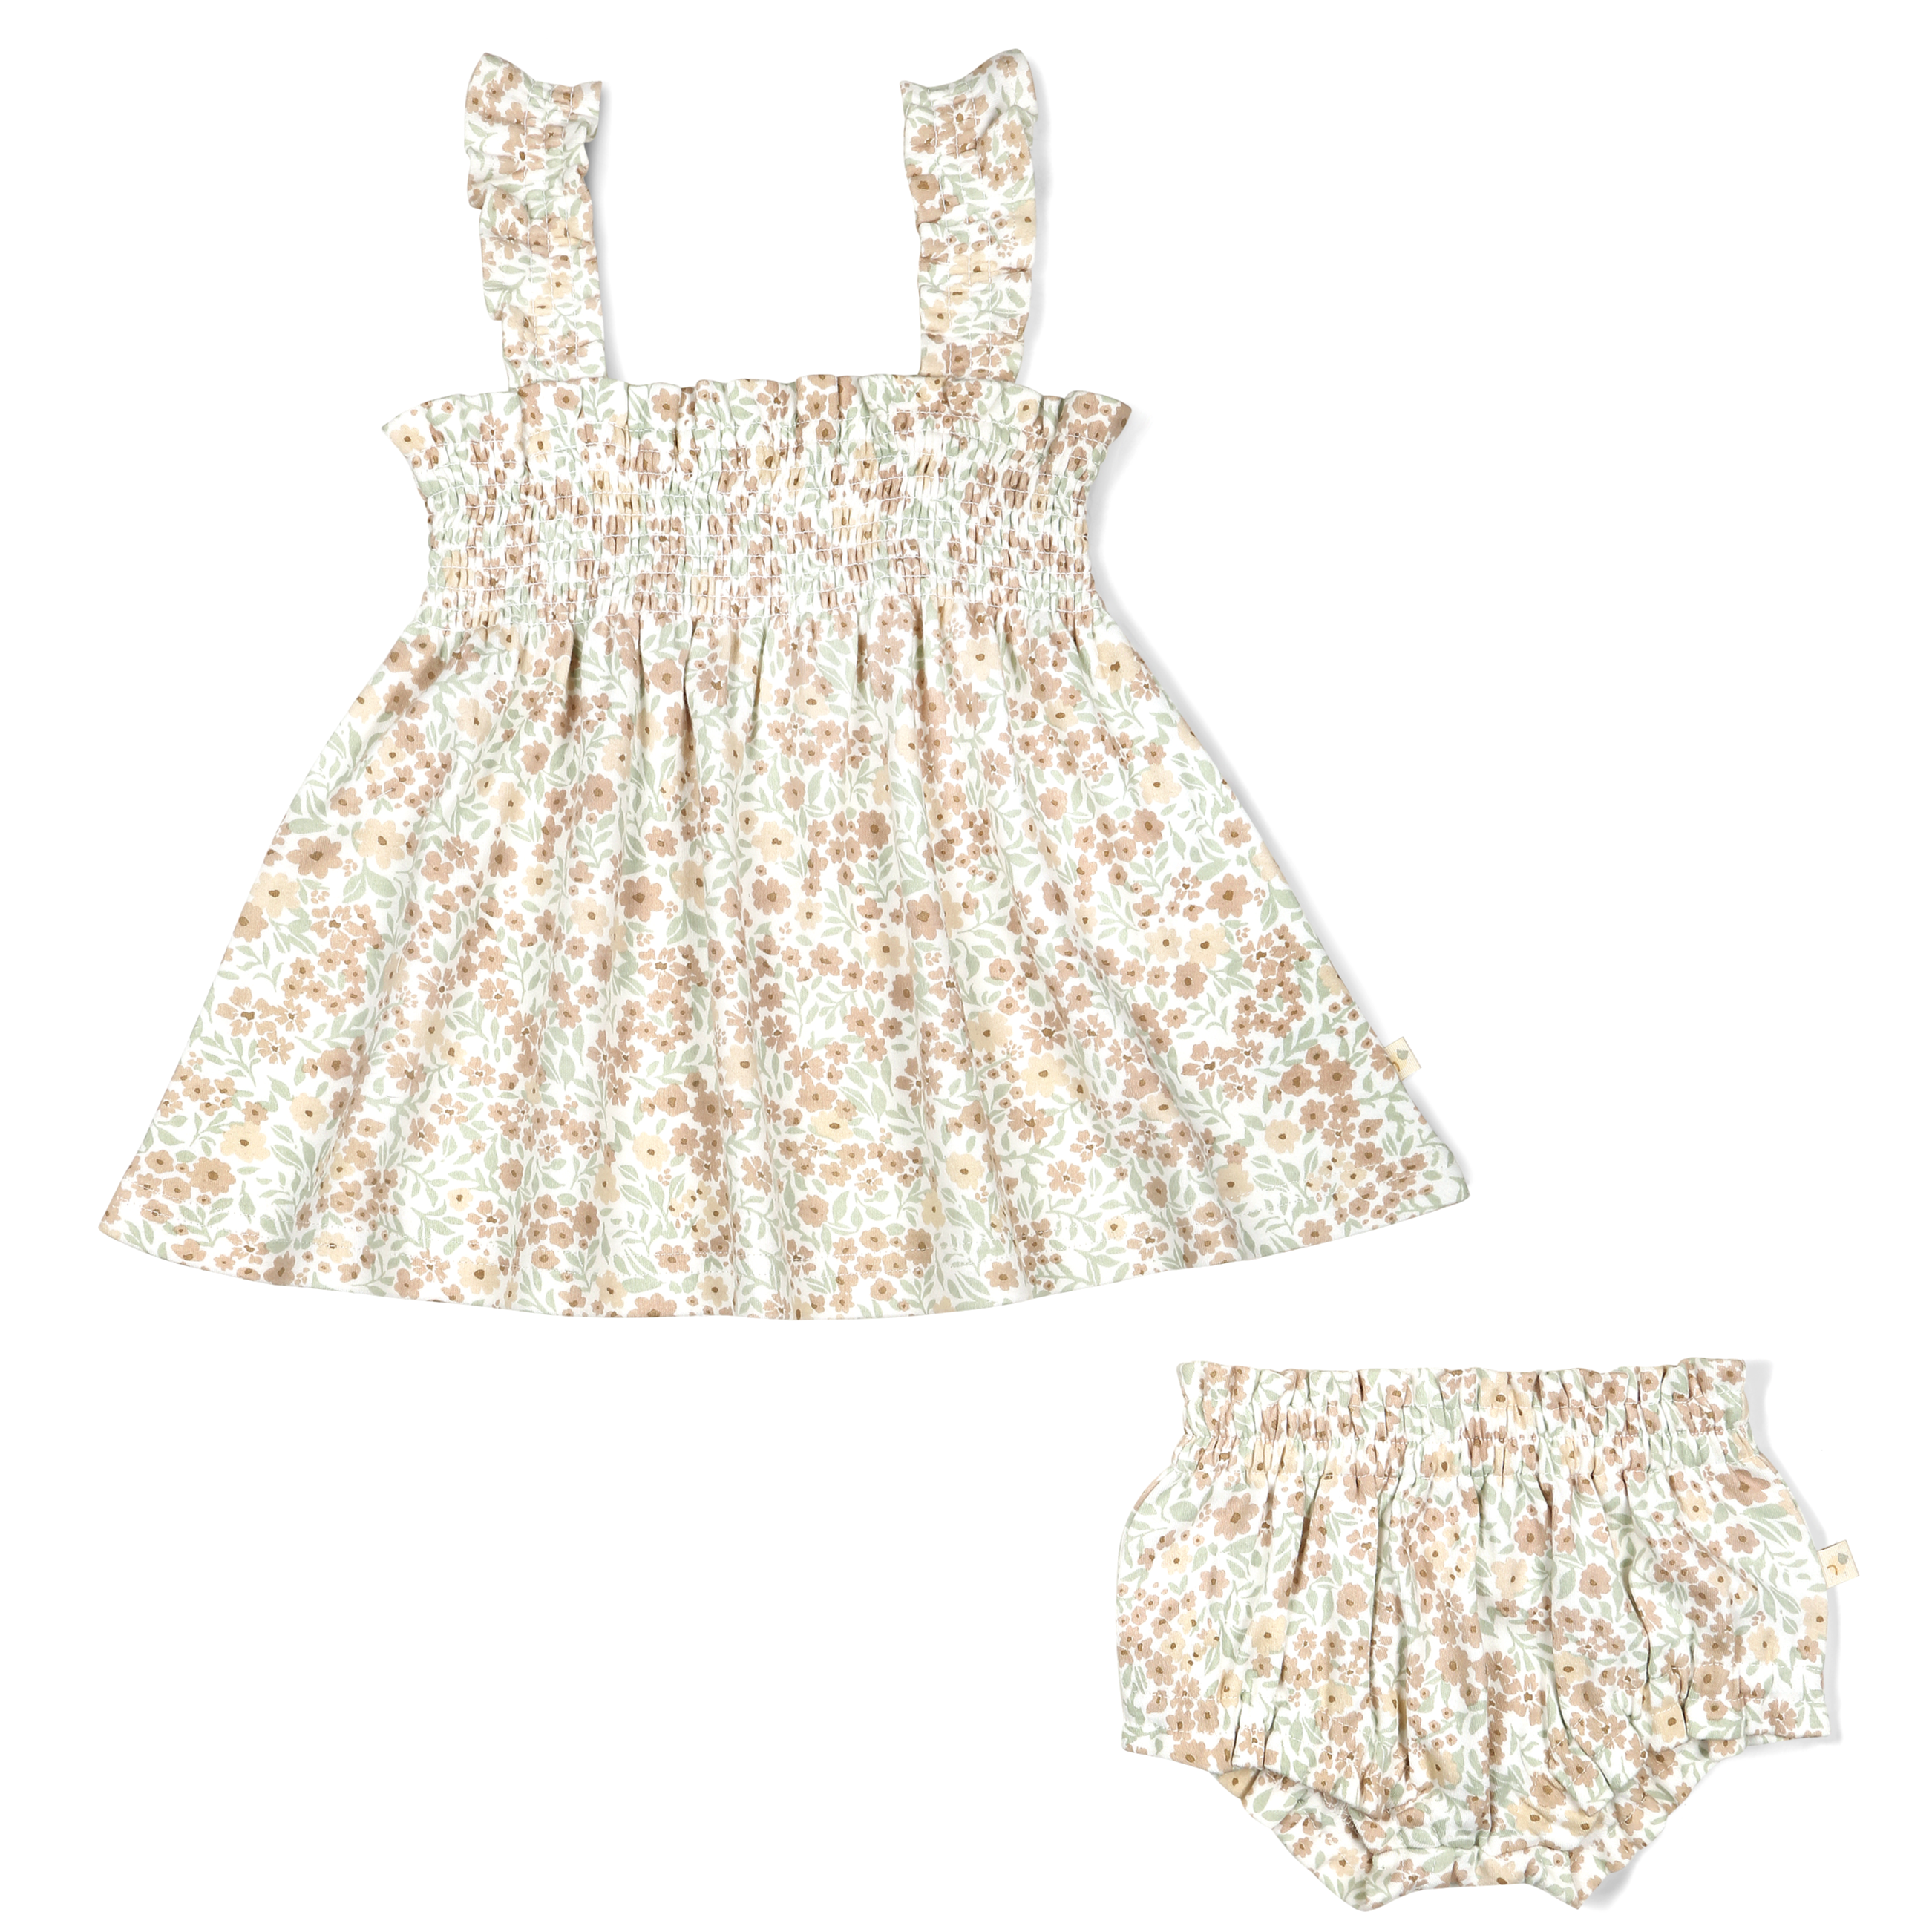 An Organic Smocked Dress - Summer Floral by Makemake Organics with spaghetti straps and a matching bloomer set, displayed on a white background.